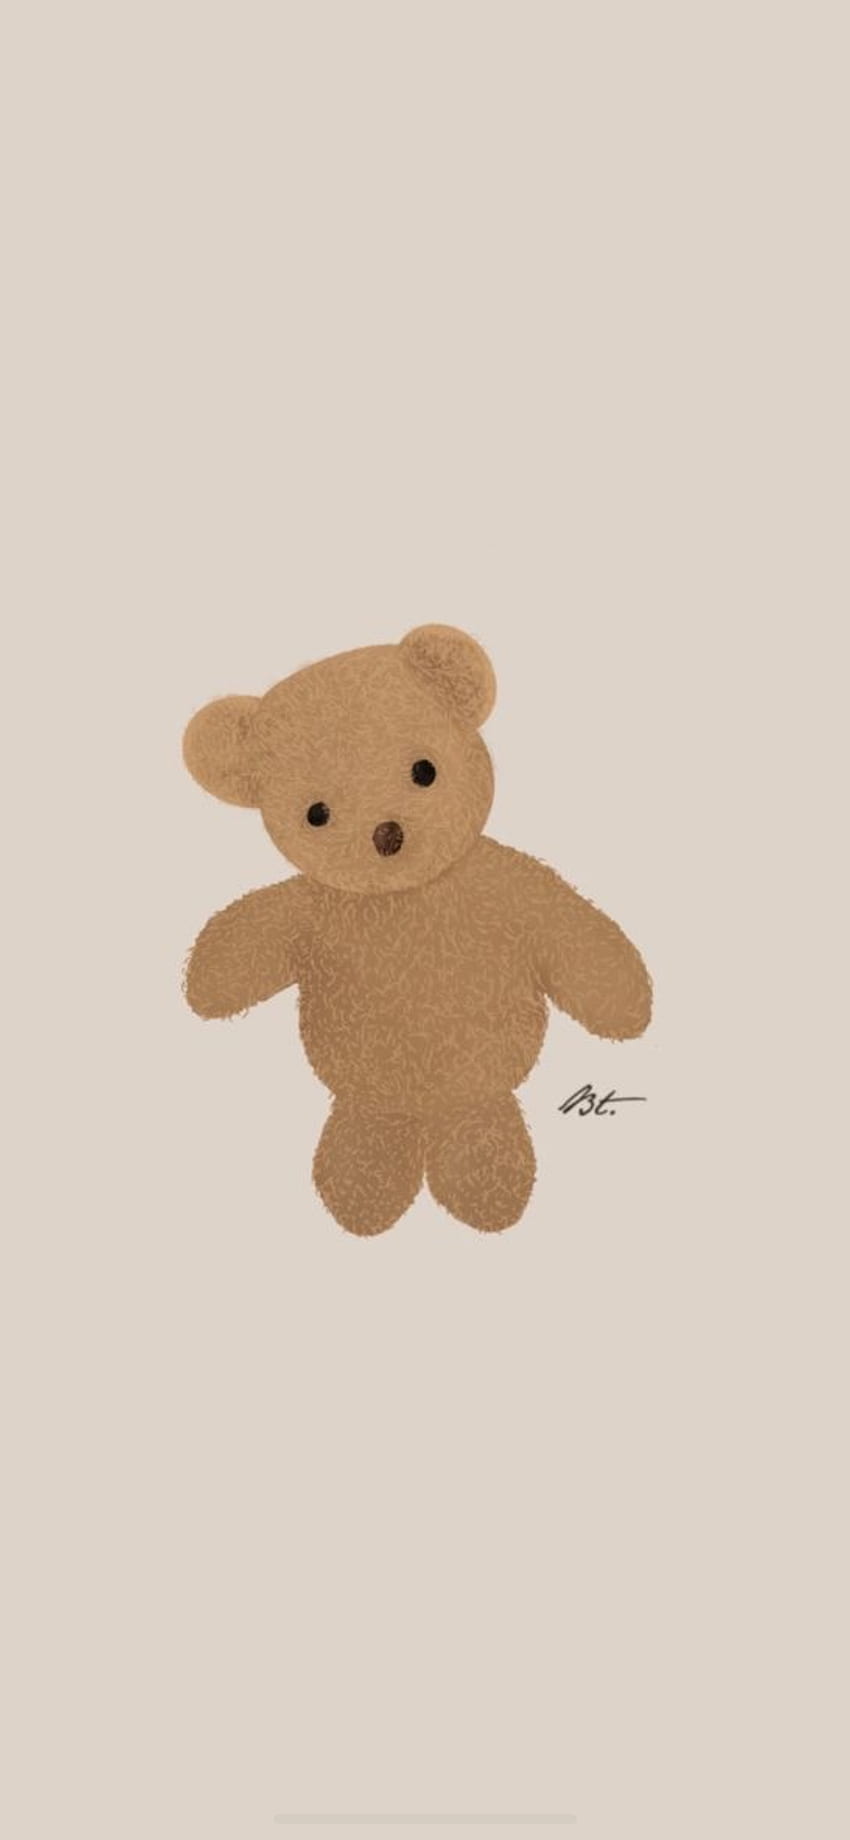 A brown teddy bear on a beige background - Light brown